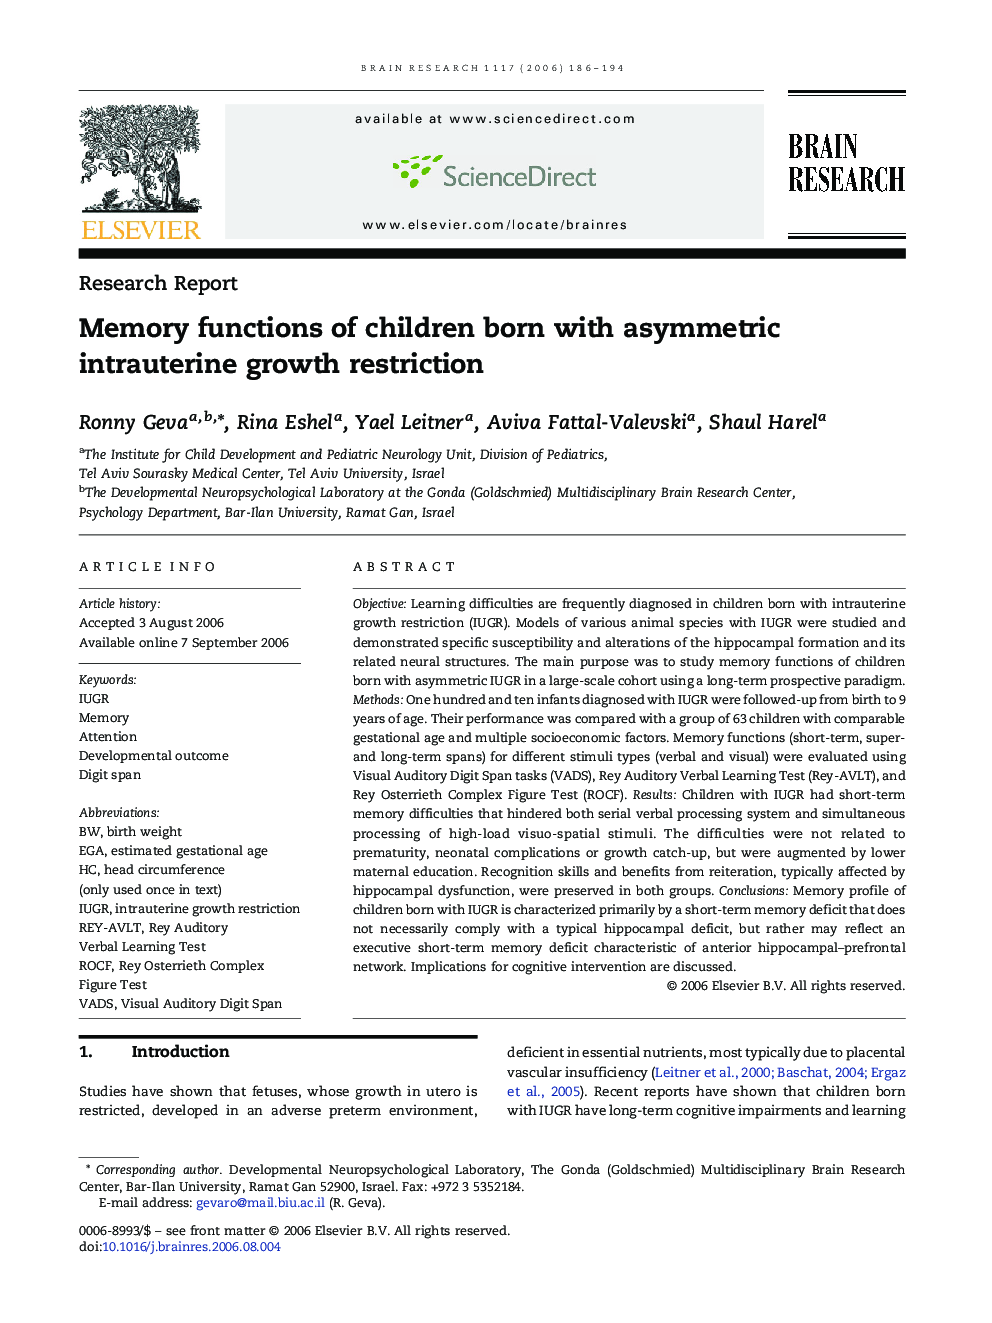 Memory functions of children born with asymmetric intrauterine growth restriction